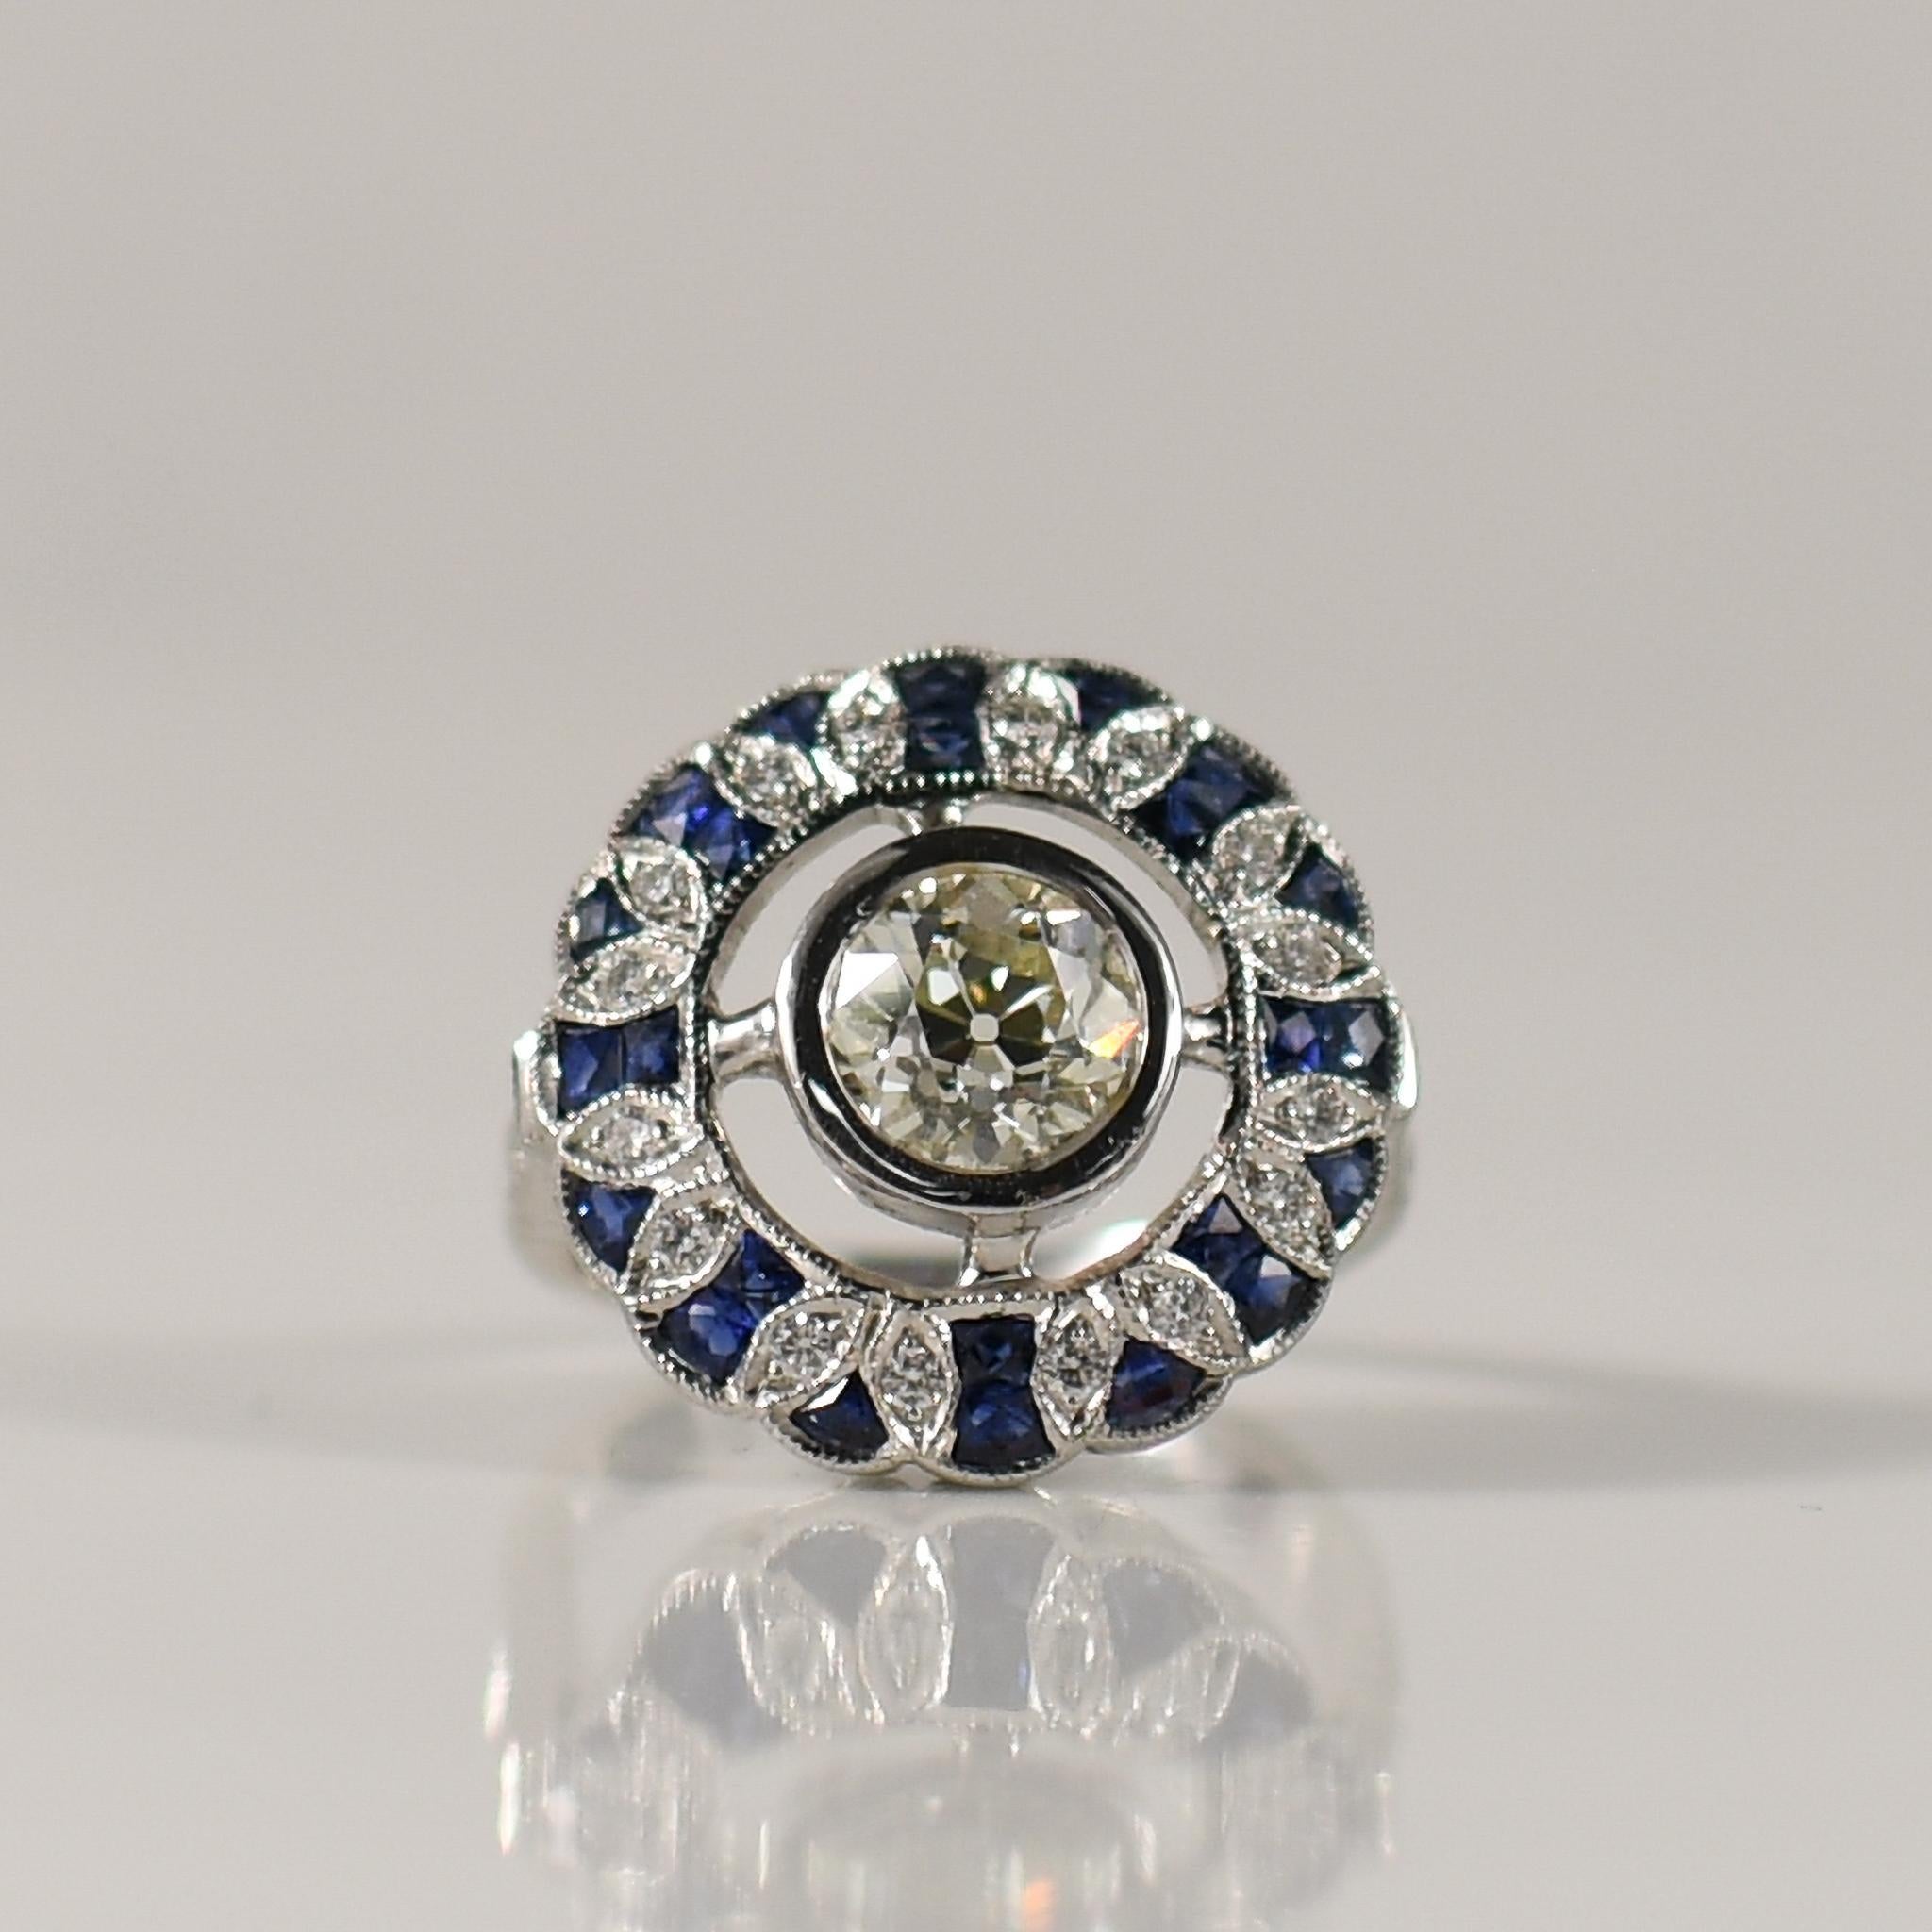 Step into the opulent world of the Roaring Twenties with this exquisite Art Deco inspired ring. Its focal point is a stunning 1.38 carat old European cut diamond, elegantly bezel set to exude timeless sophistication. Surrounding the center stone is